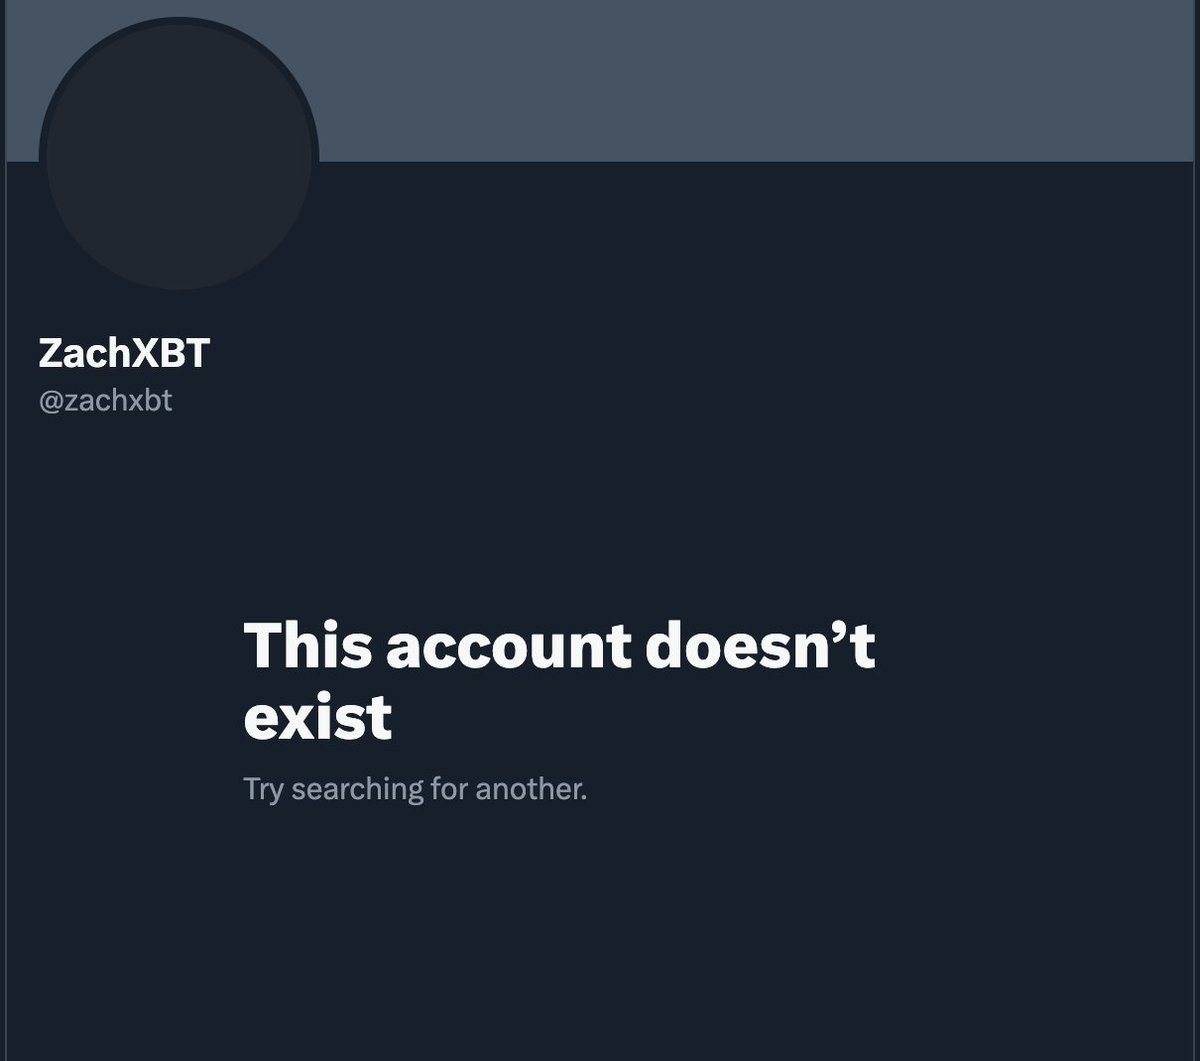 Crypto sleuth @zachxbt has deleted his account.